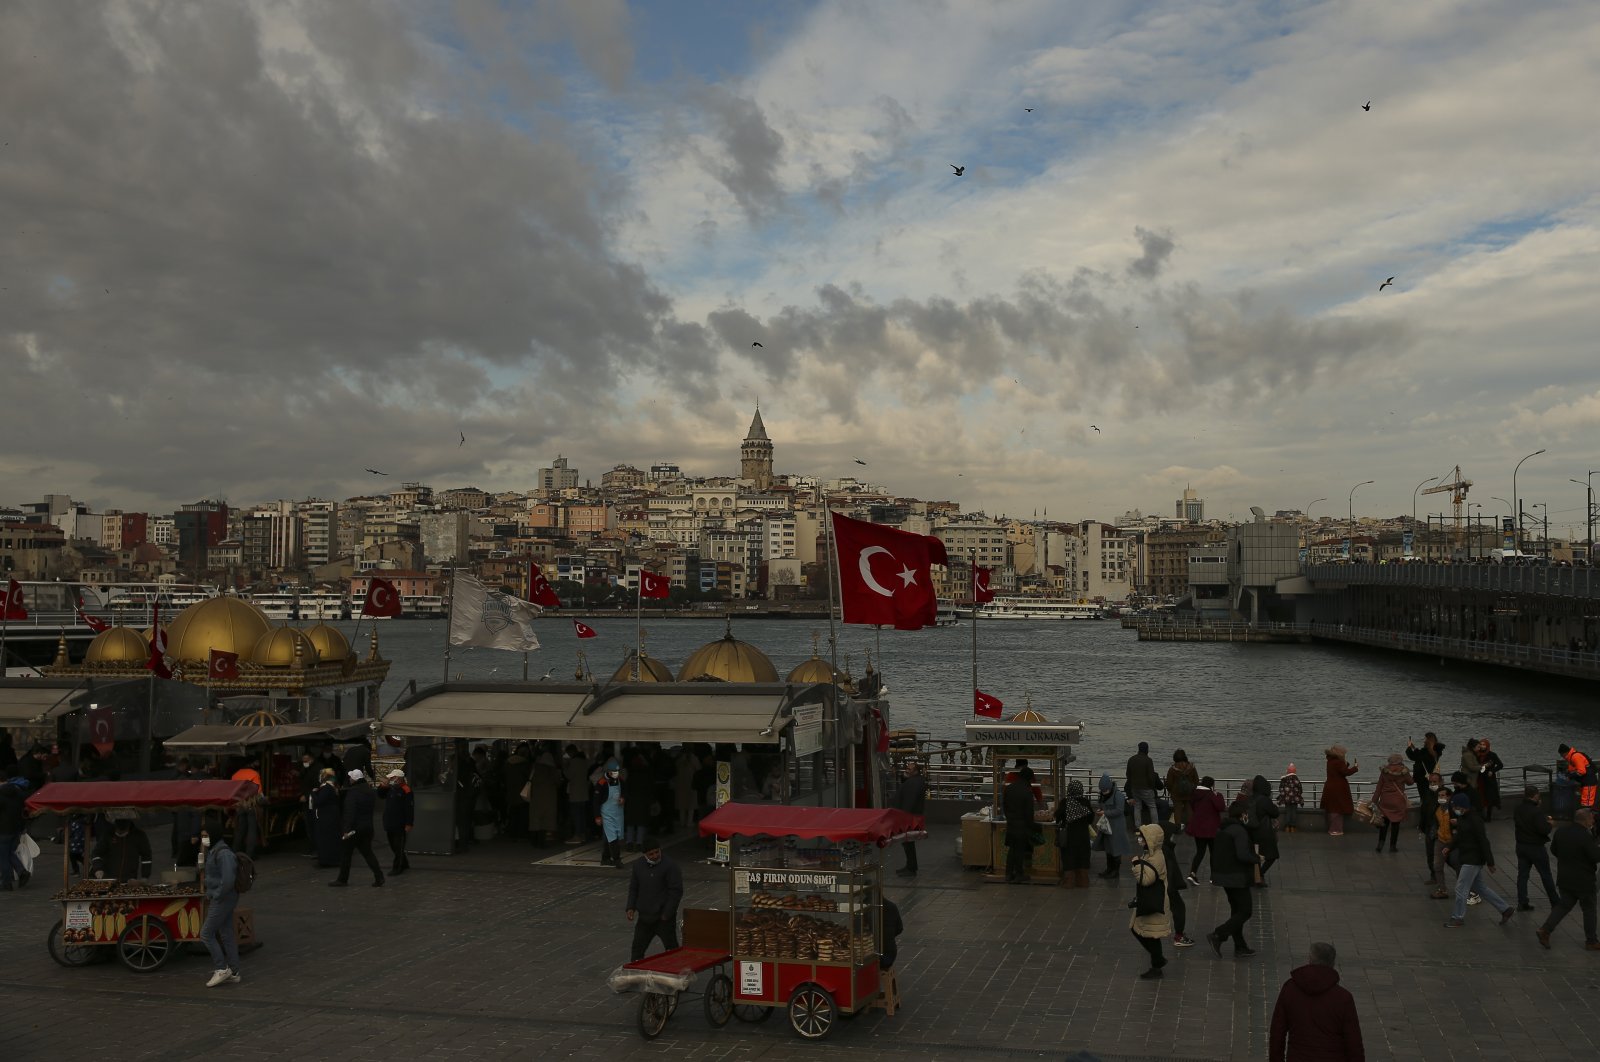 People wearing masks to help protect against the spread of COVID-19 walk around the Galata Bridge hours before a two-day weekend lockdown, in Istanbul, Friday, Jan. 29, 2021. (AP Photo)